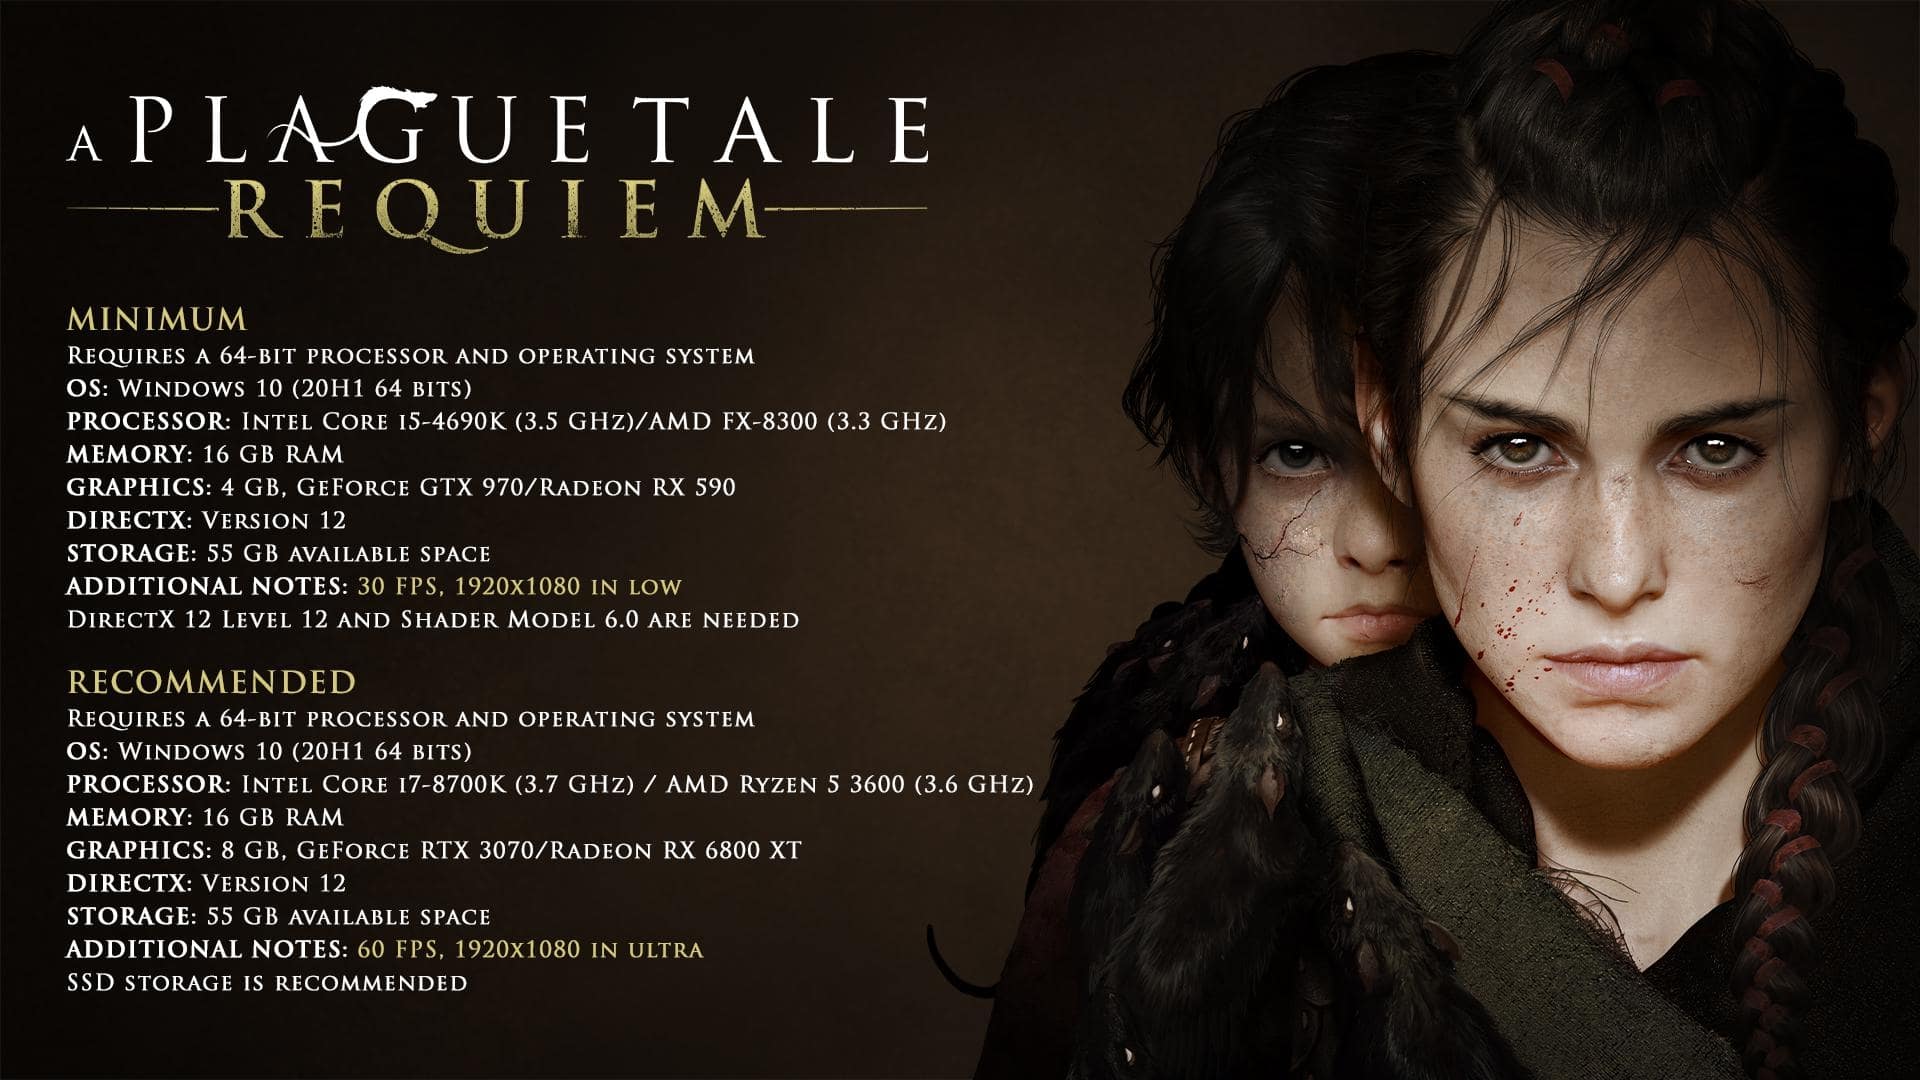 What kind of computer do you need for A Plague Tale: Reqiuem